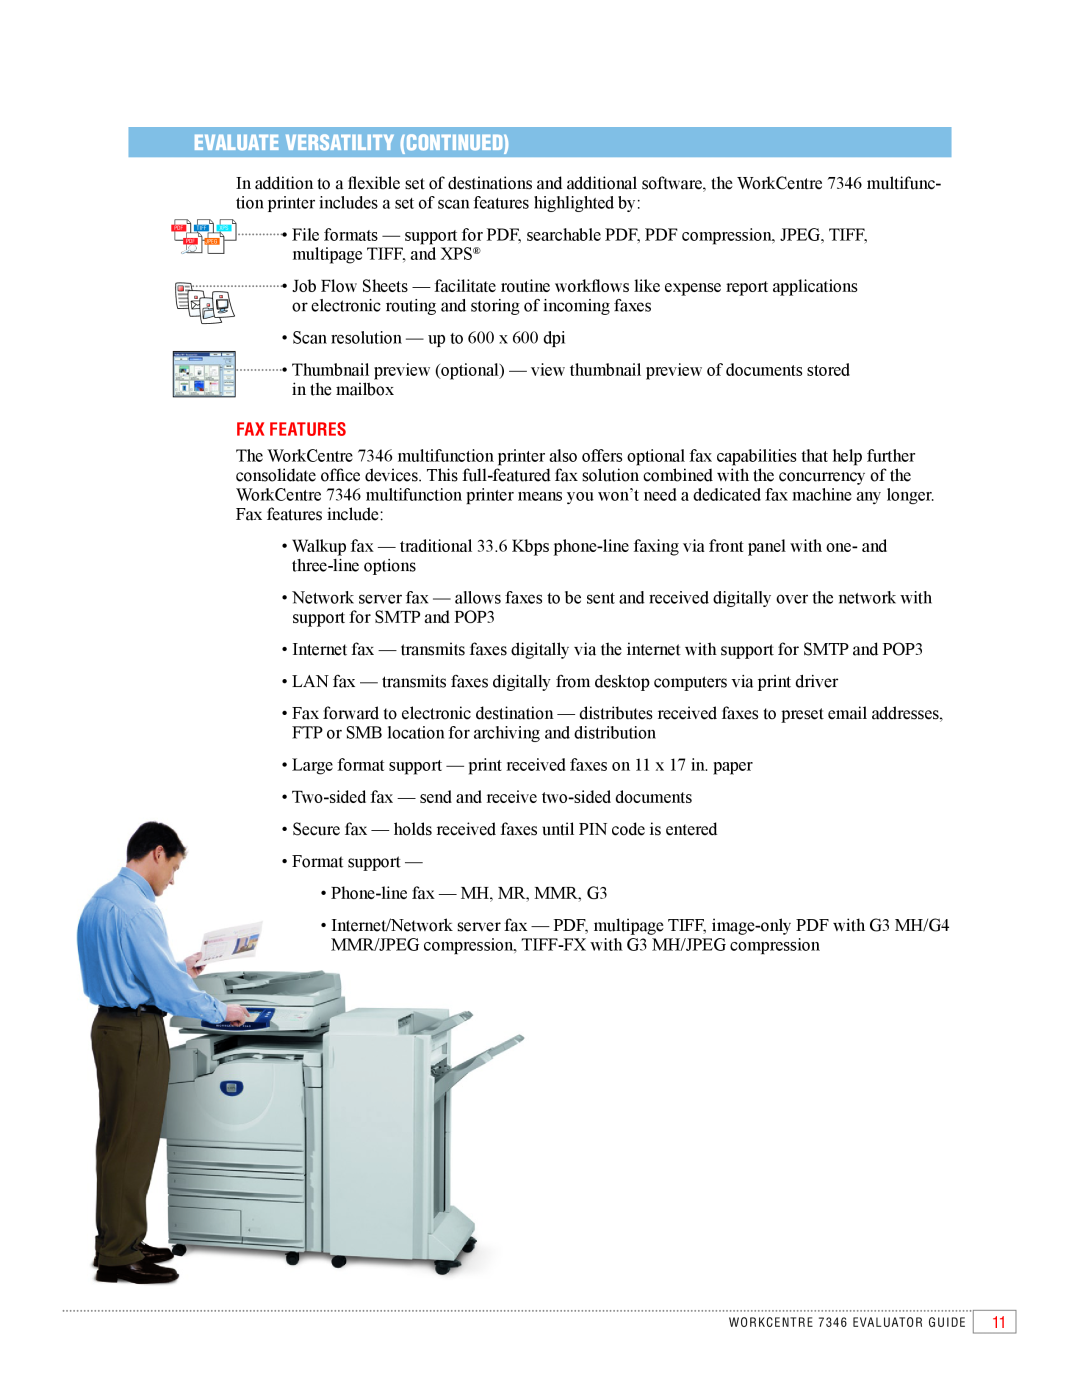 Xerox 7346 manual Evaluate Versatility Continued, Fax Features 